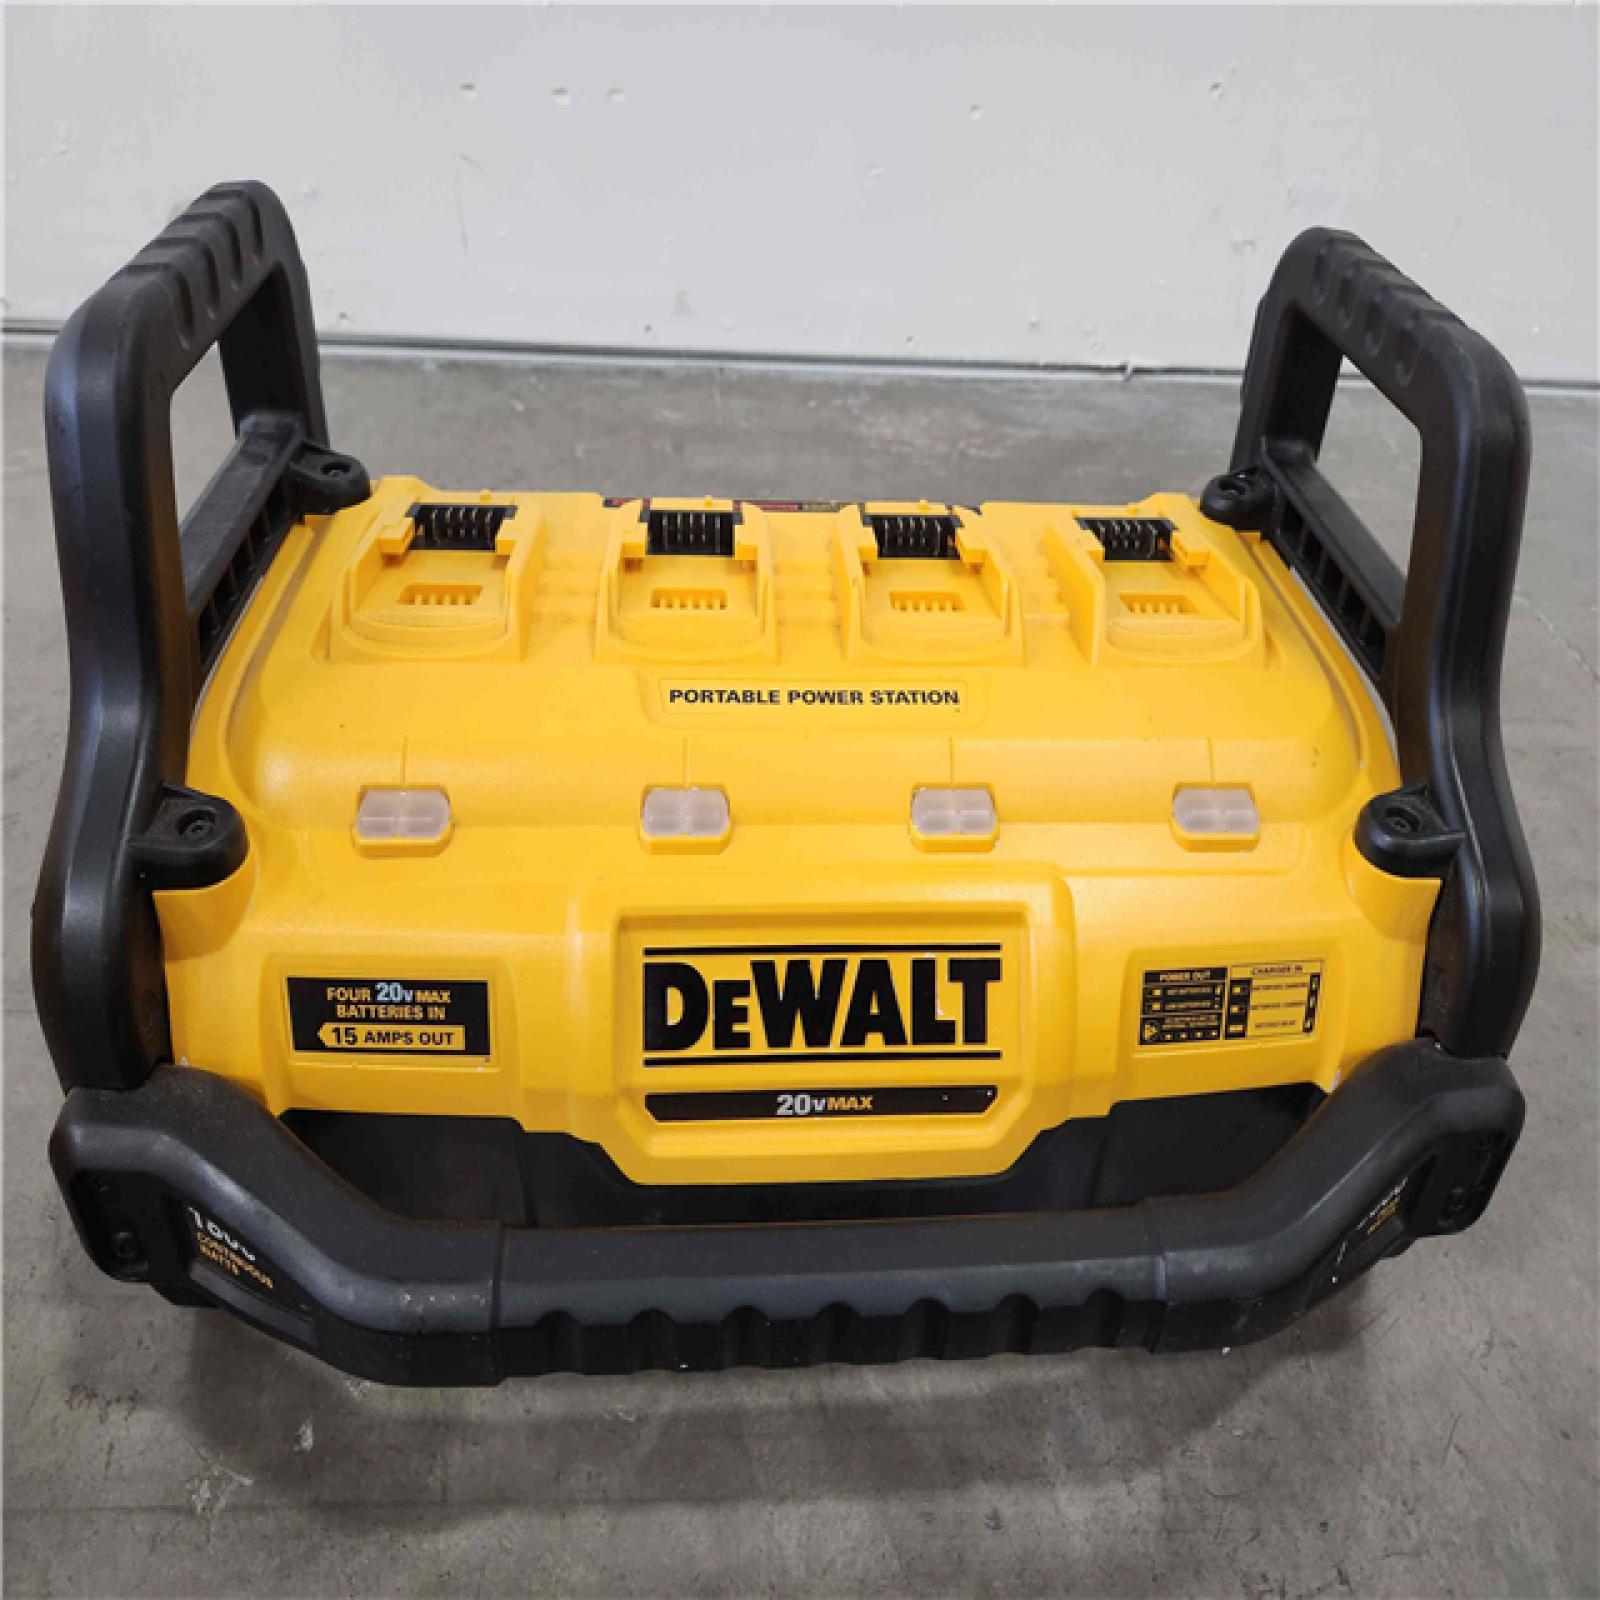 Phoenix Location Appears NEW DEWALT 1800 Watt Portable Power Station and 20V/60V MAX Lithium-Ion Battery Charger DCB1800B